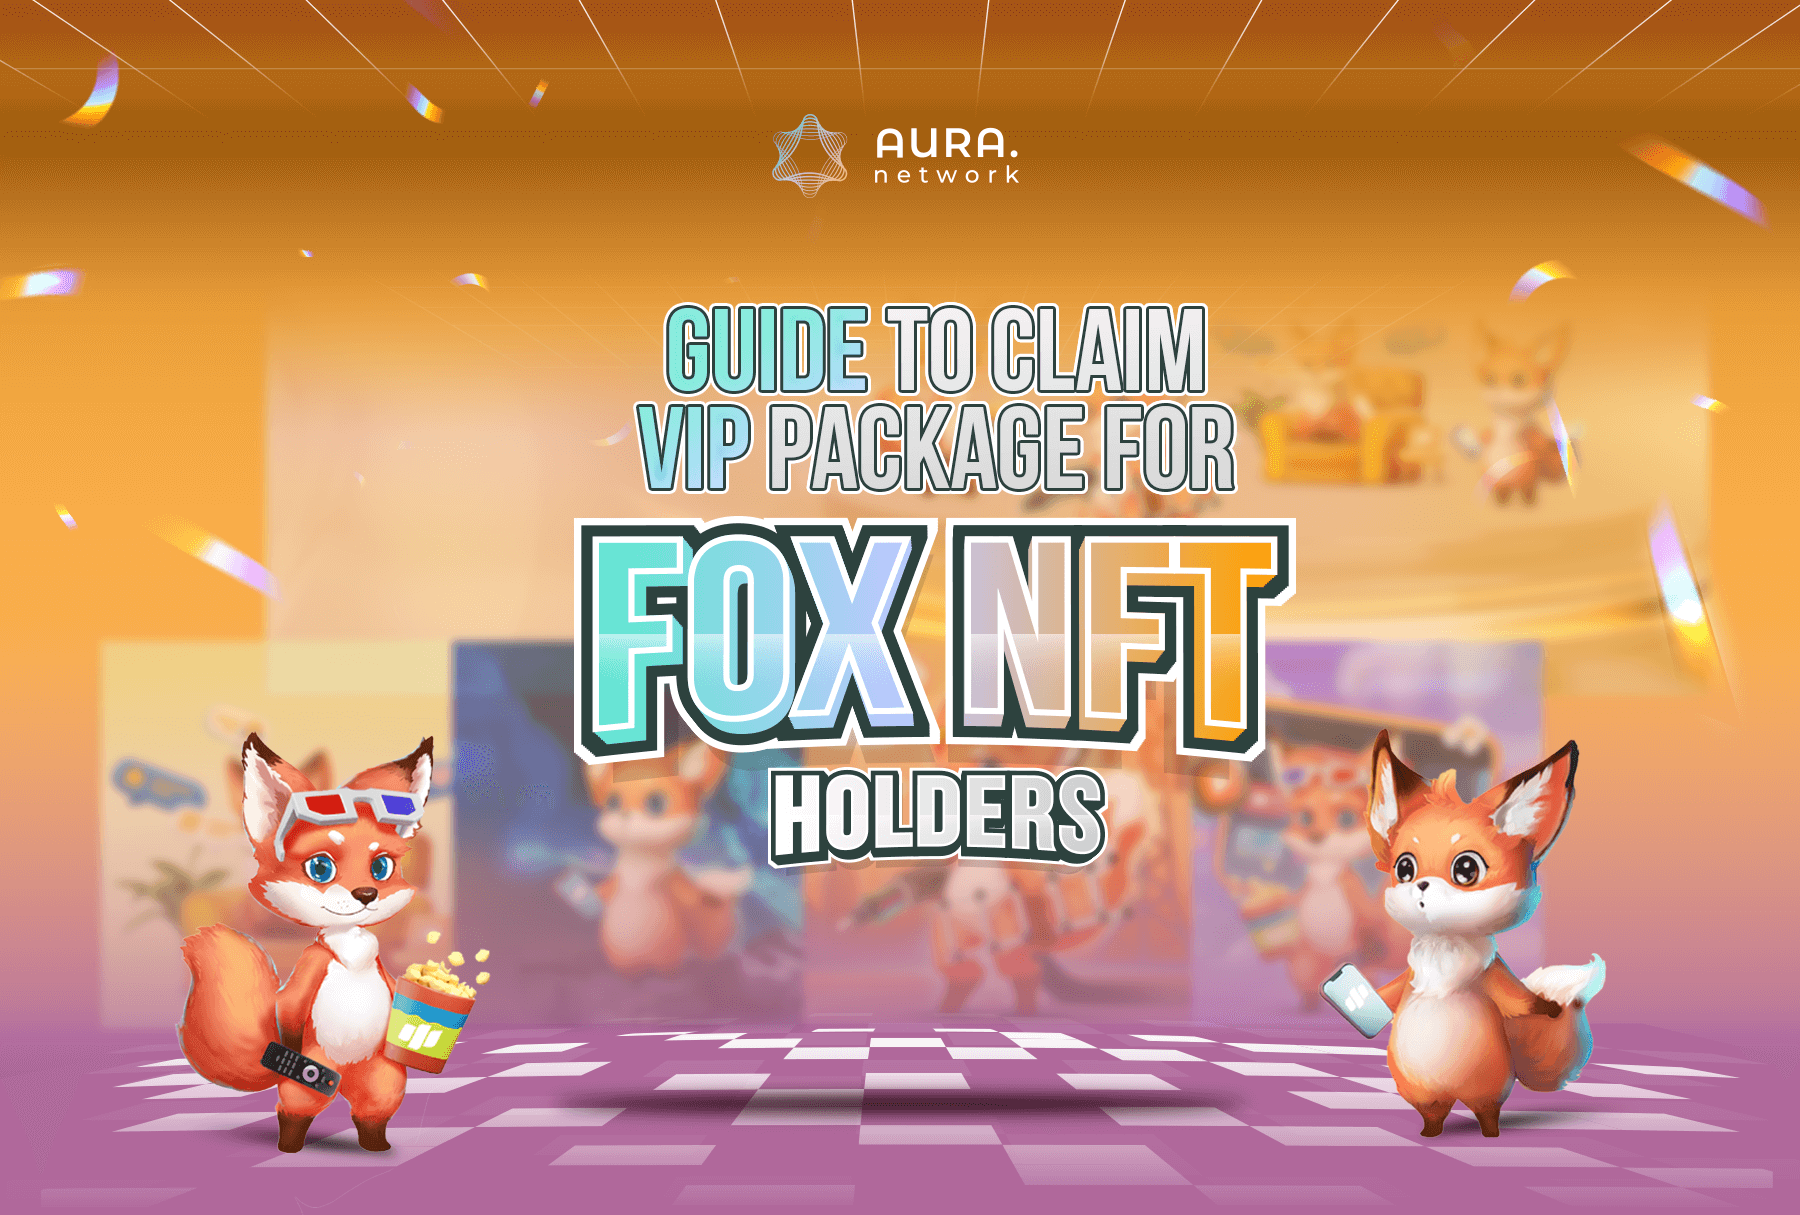 Guide to claim VIP package for FOX NFT holders